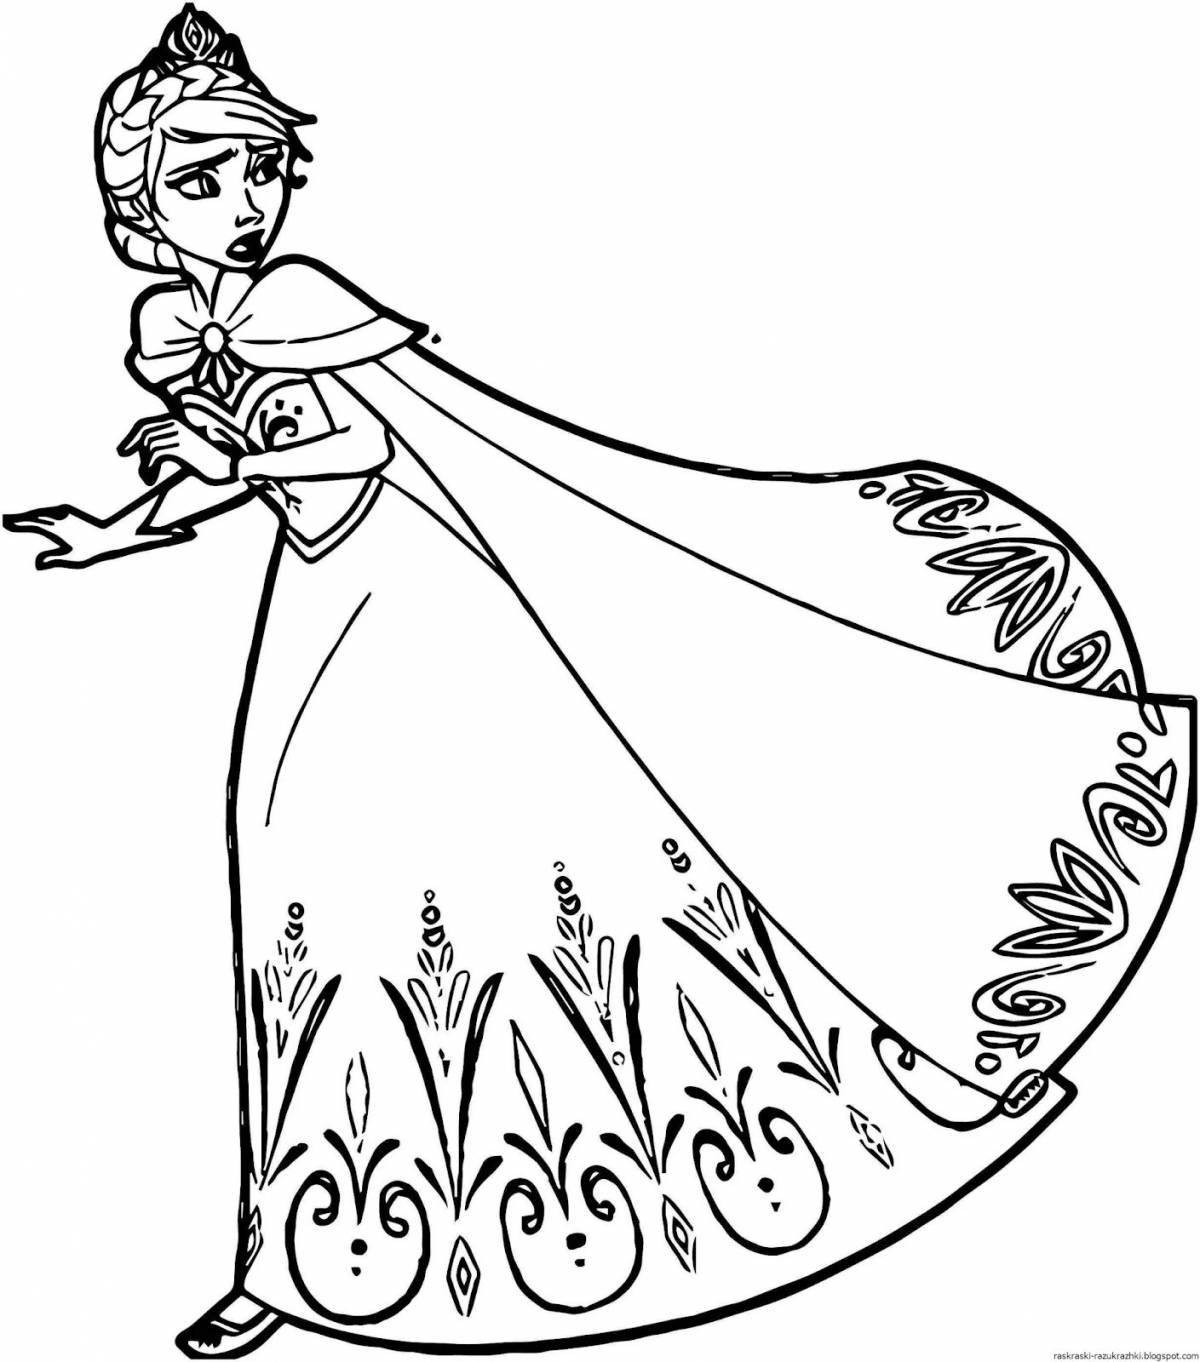 Exquisite snow queen coloring book for girls